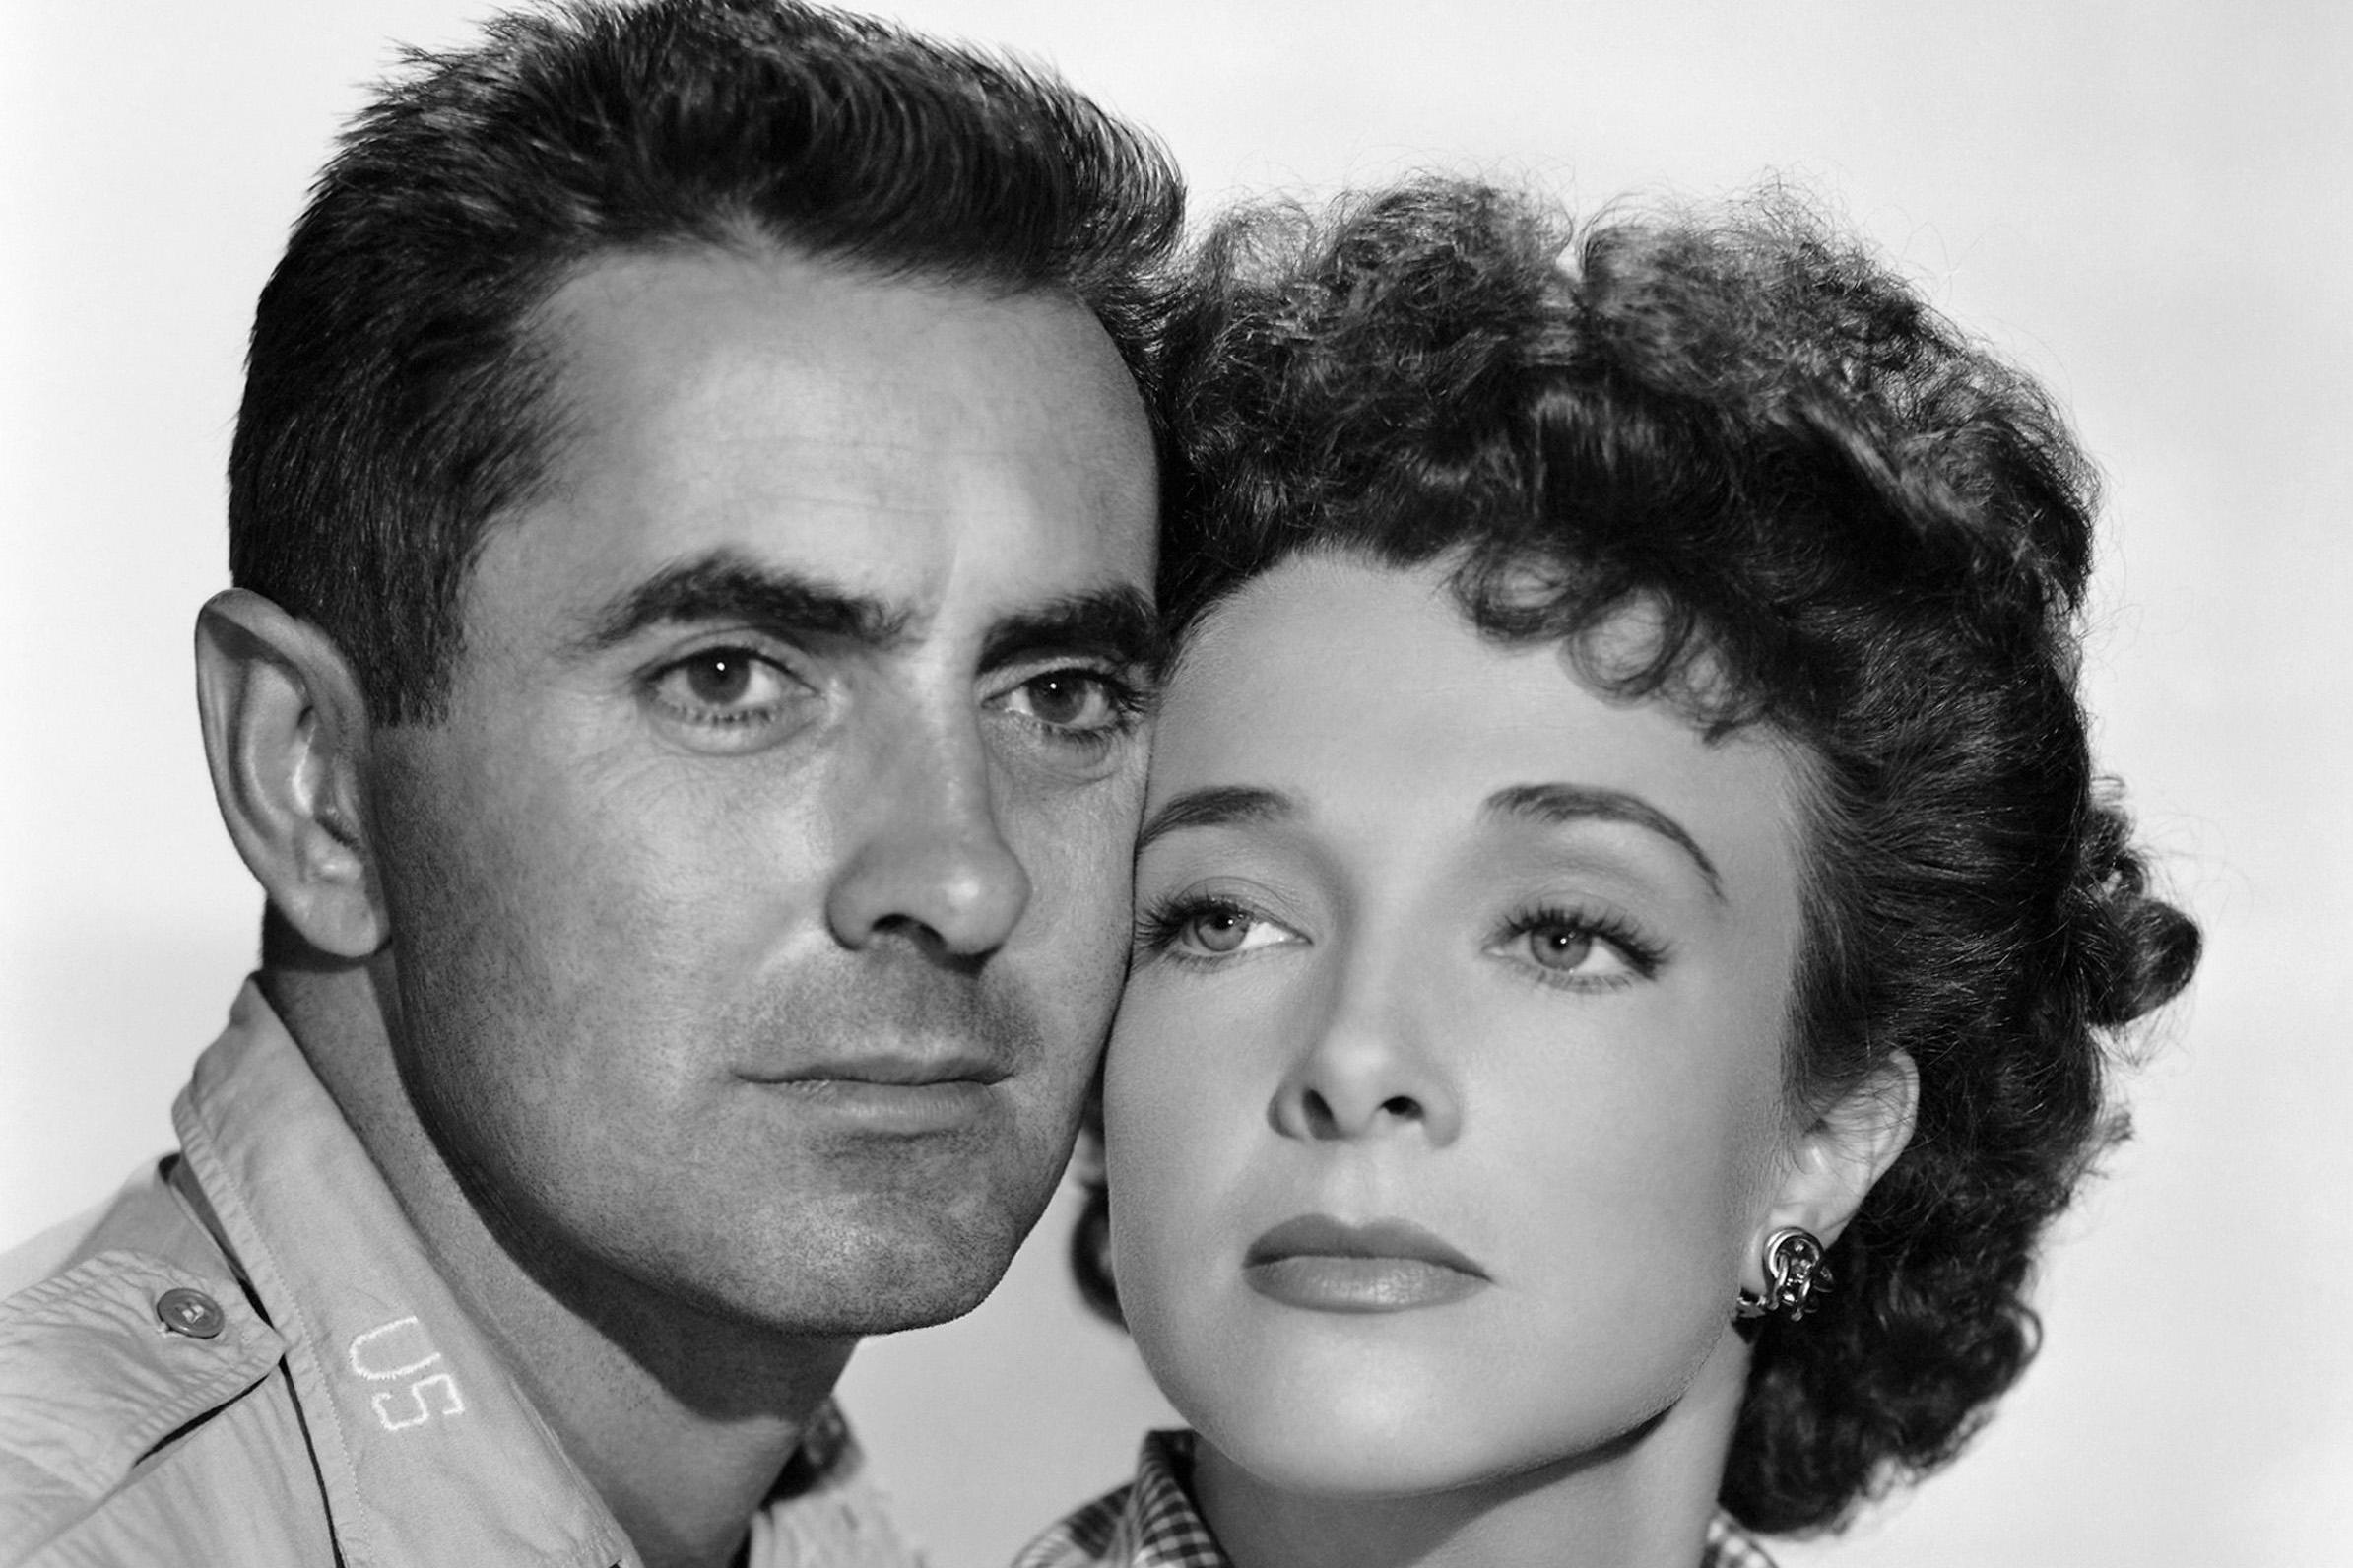 Presle co-starred with Tyrone Power in American Guerrilla in the Philippines